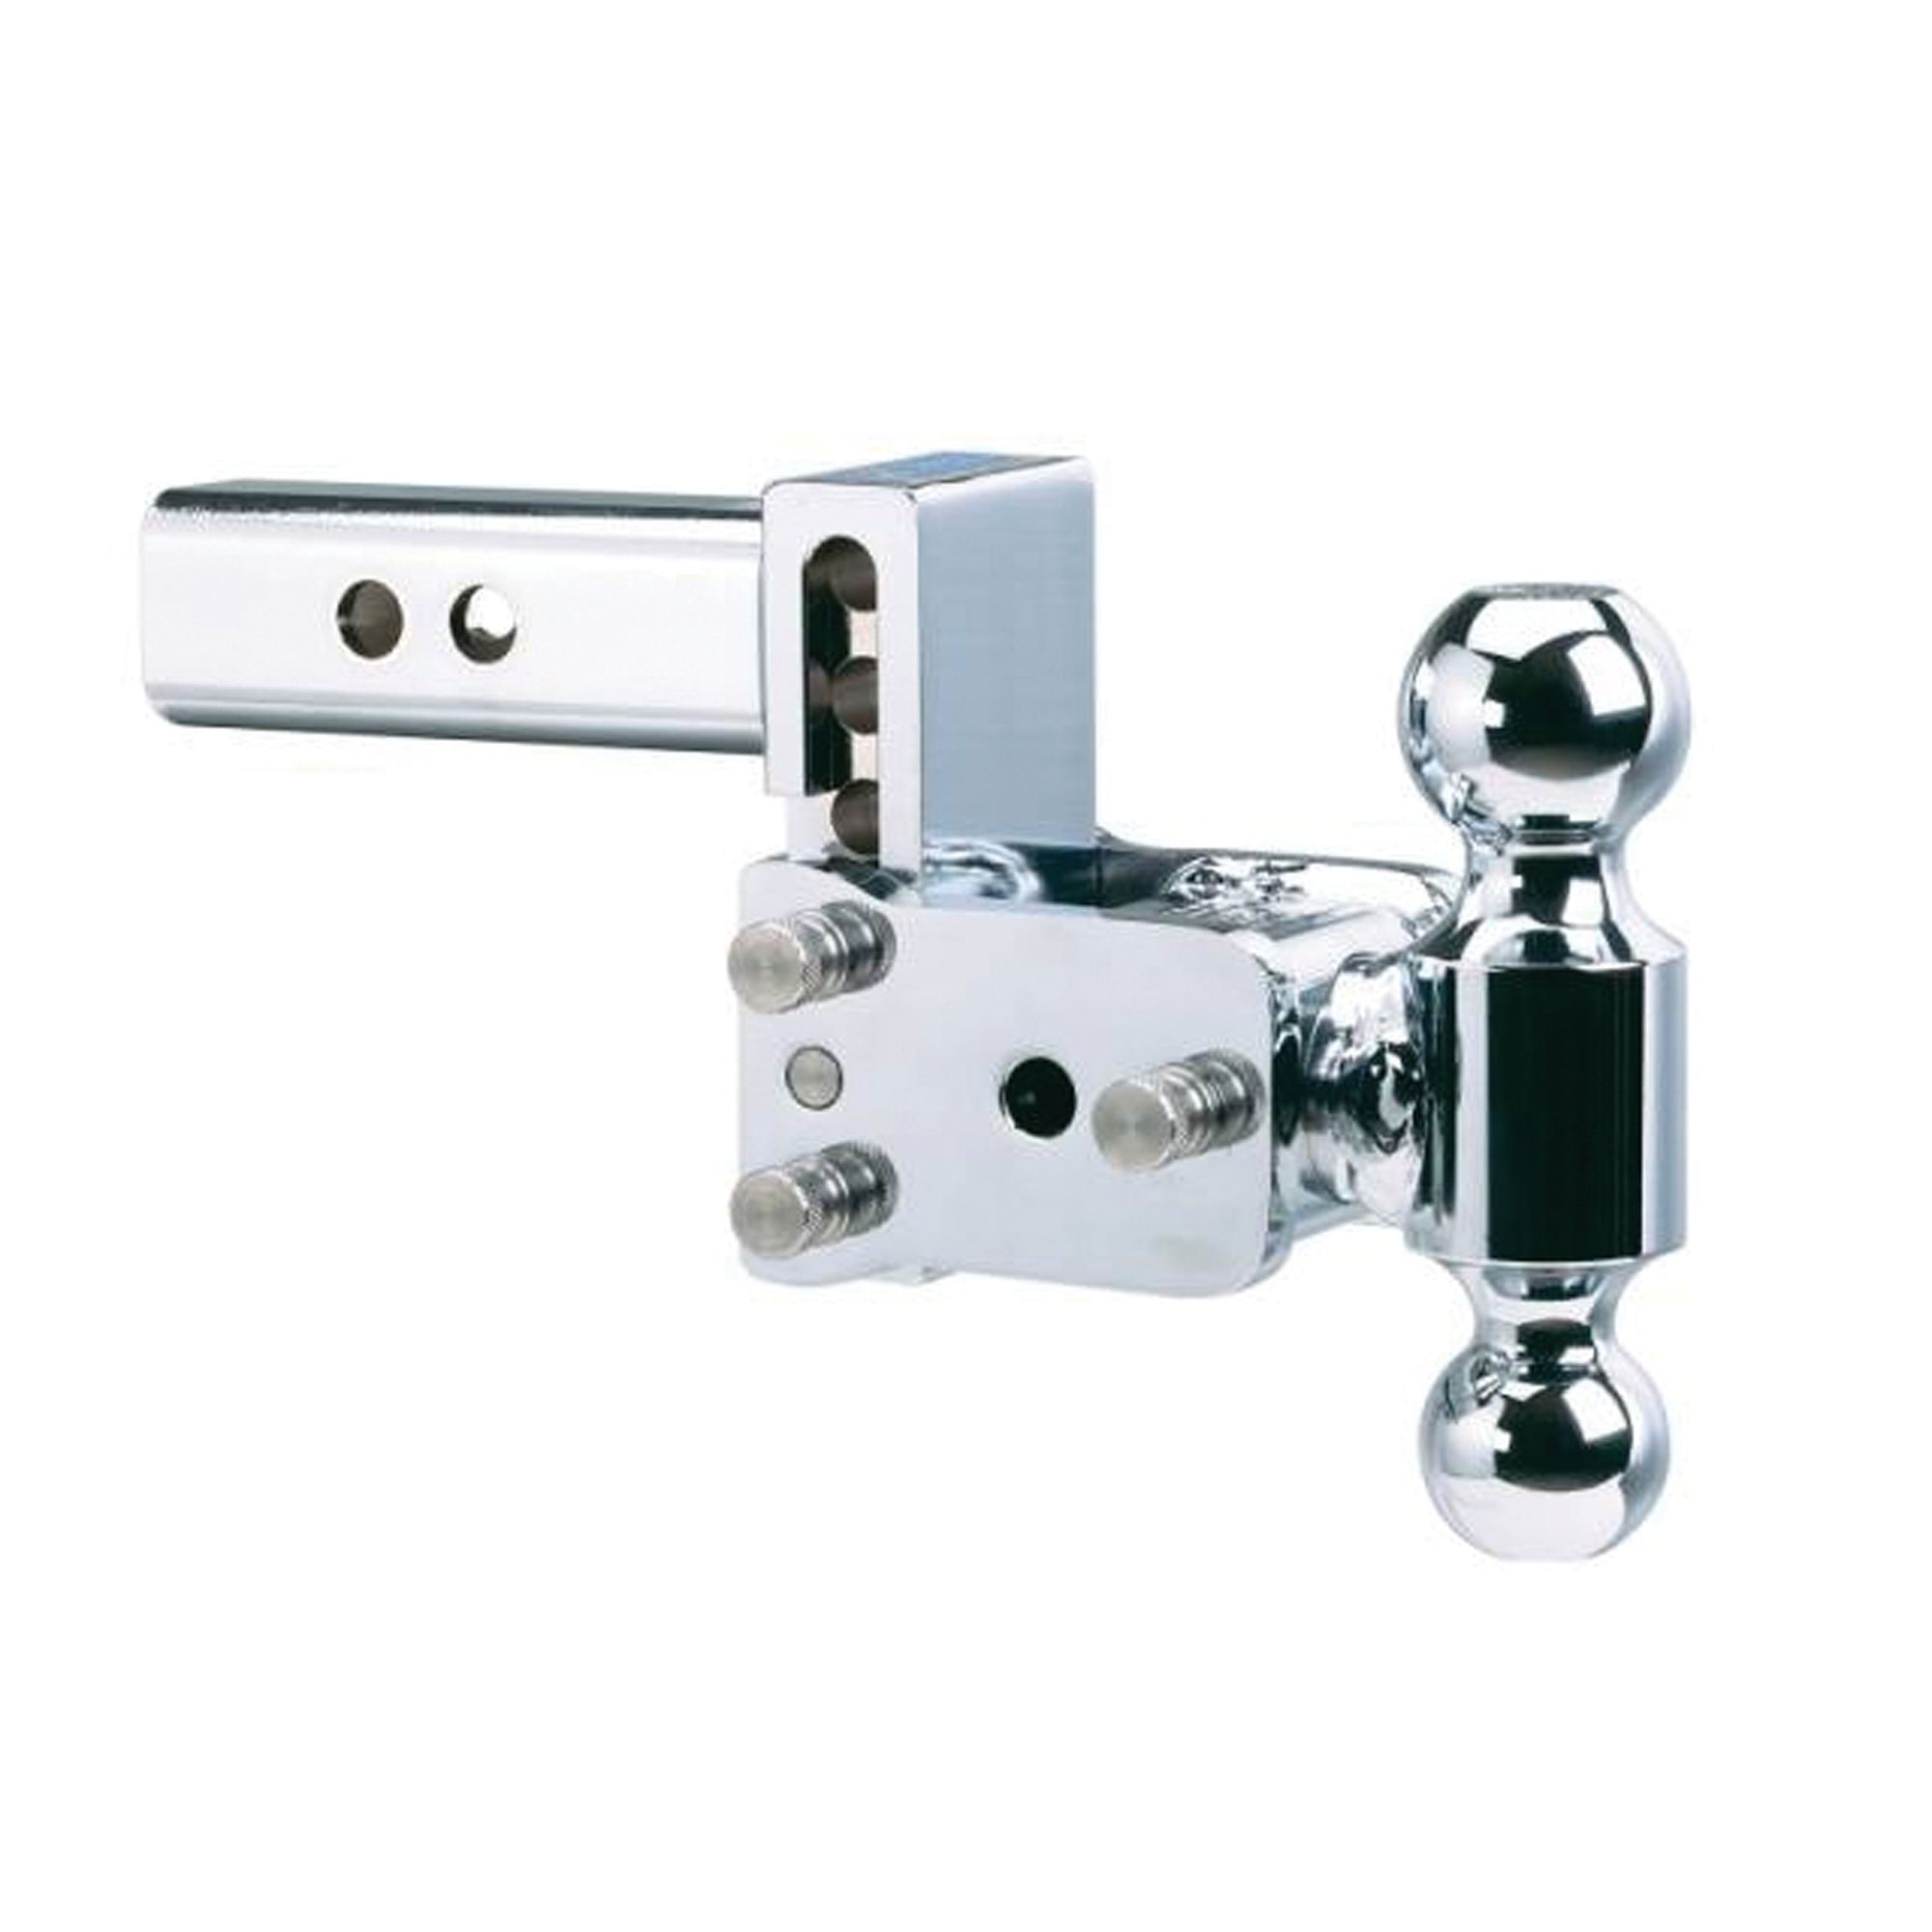 B&W Trailer Hitches TS10037C Tow and Stow Adjustable Ball Mount - 2-5/16" & 2" Ball, 5" Drop, 5.5" Rise, Chrome